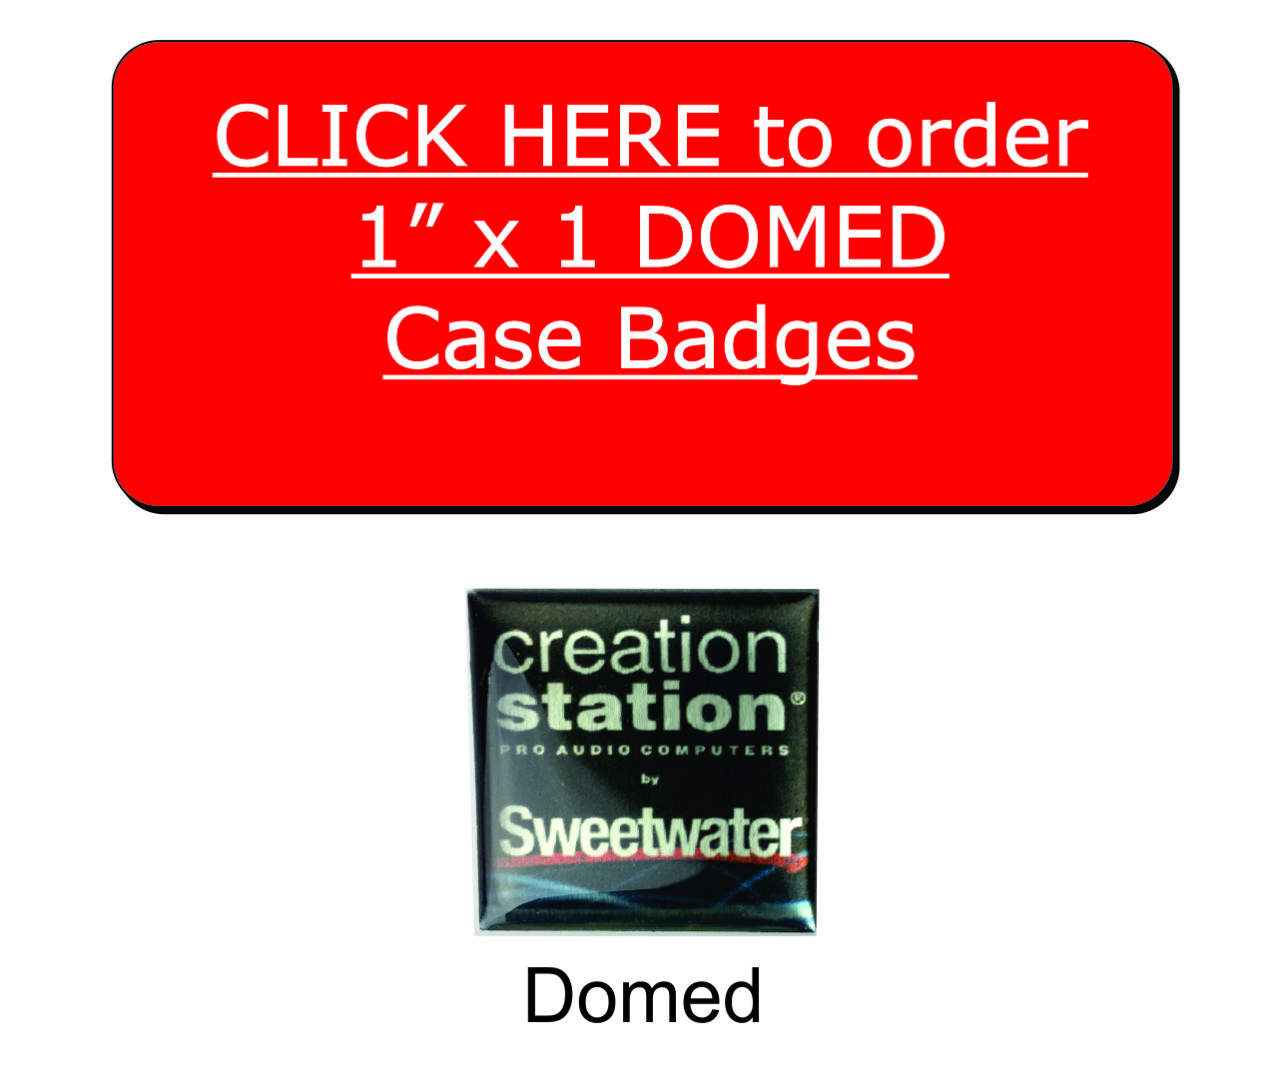 ORDER 1X1 DOMED